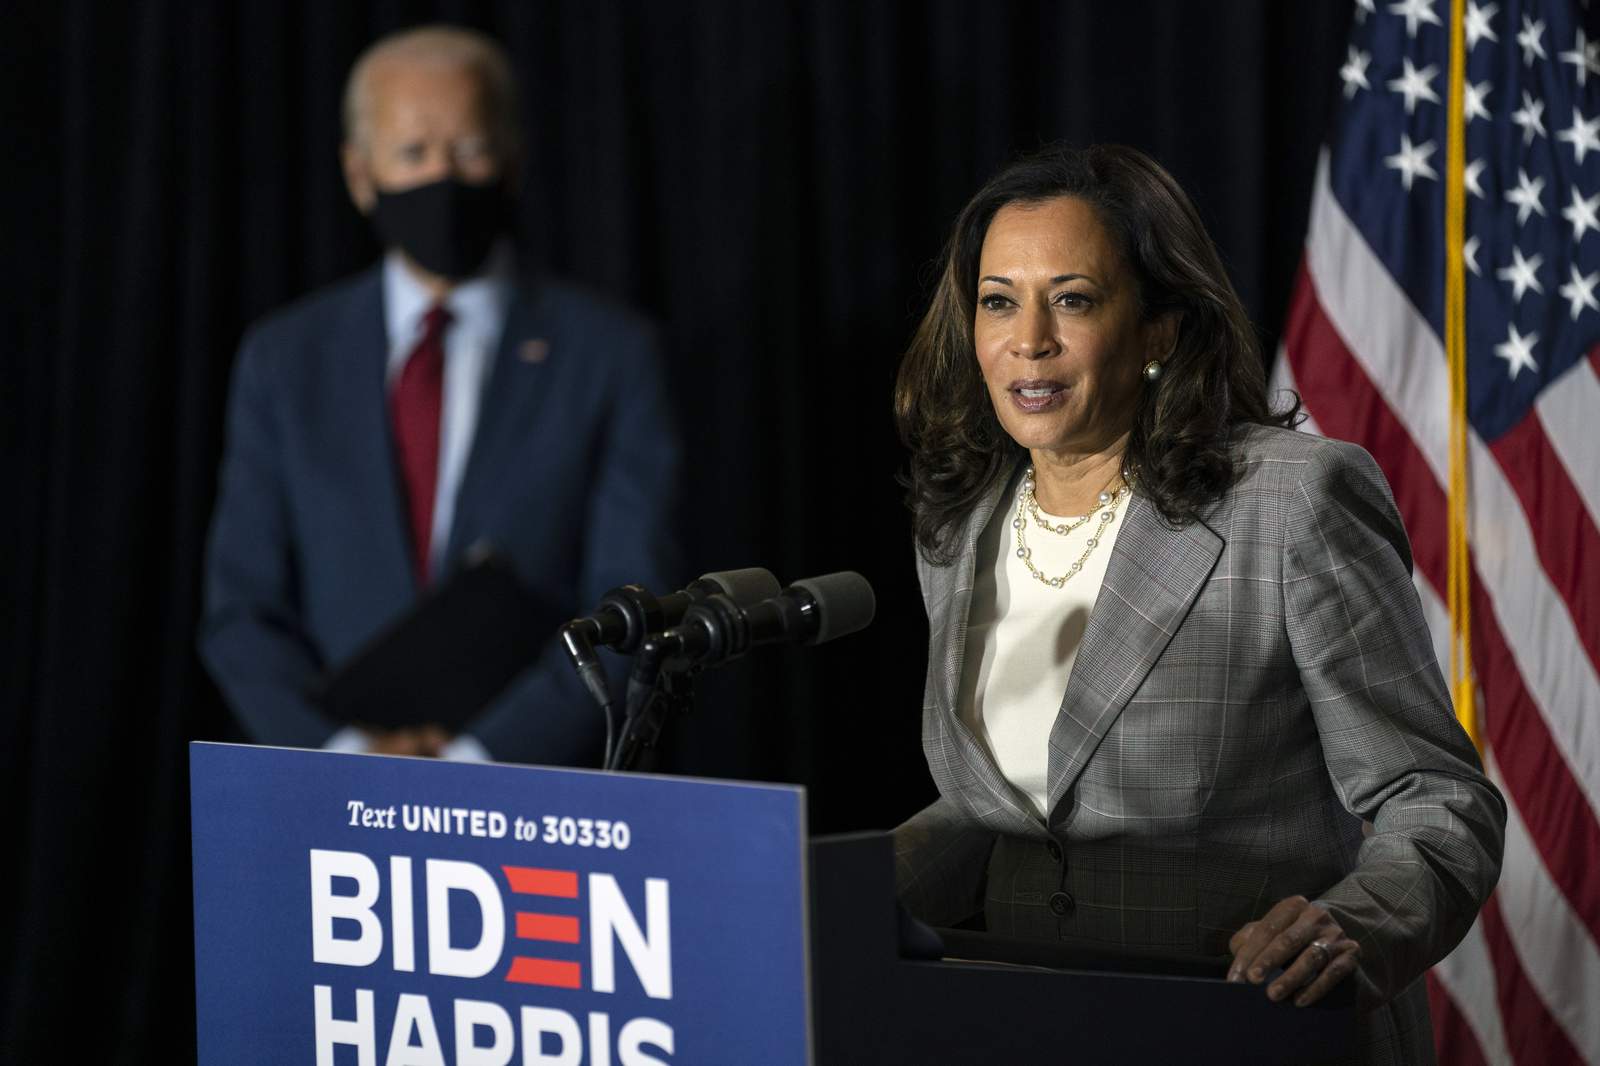 NBA says it will no longer work with Houston photographer who posted offensive meme about Kamala Harris